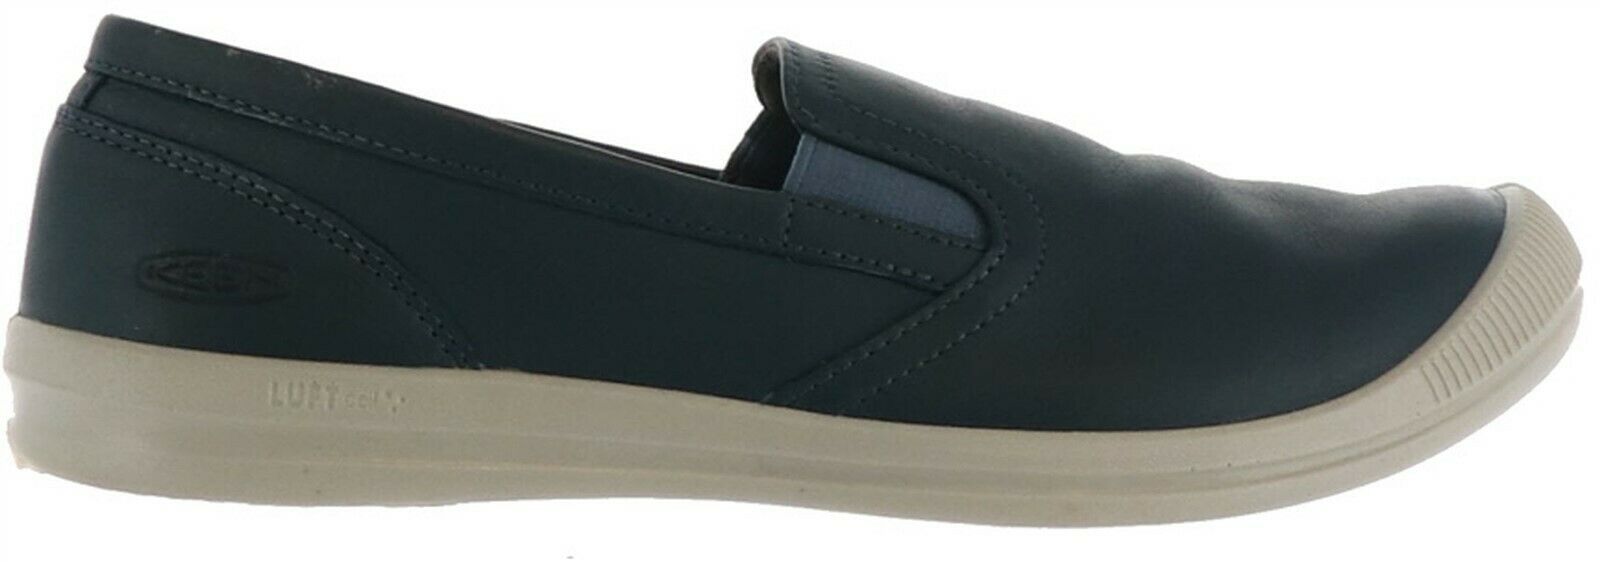 keen leather slip on shoes